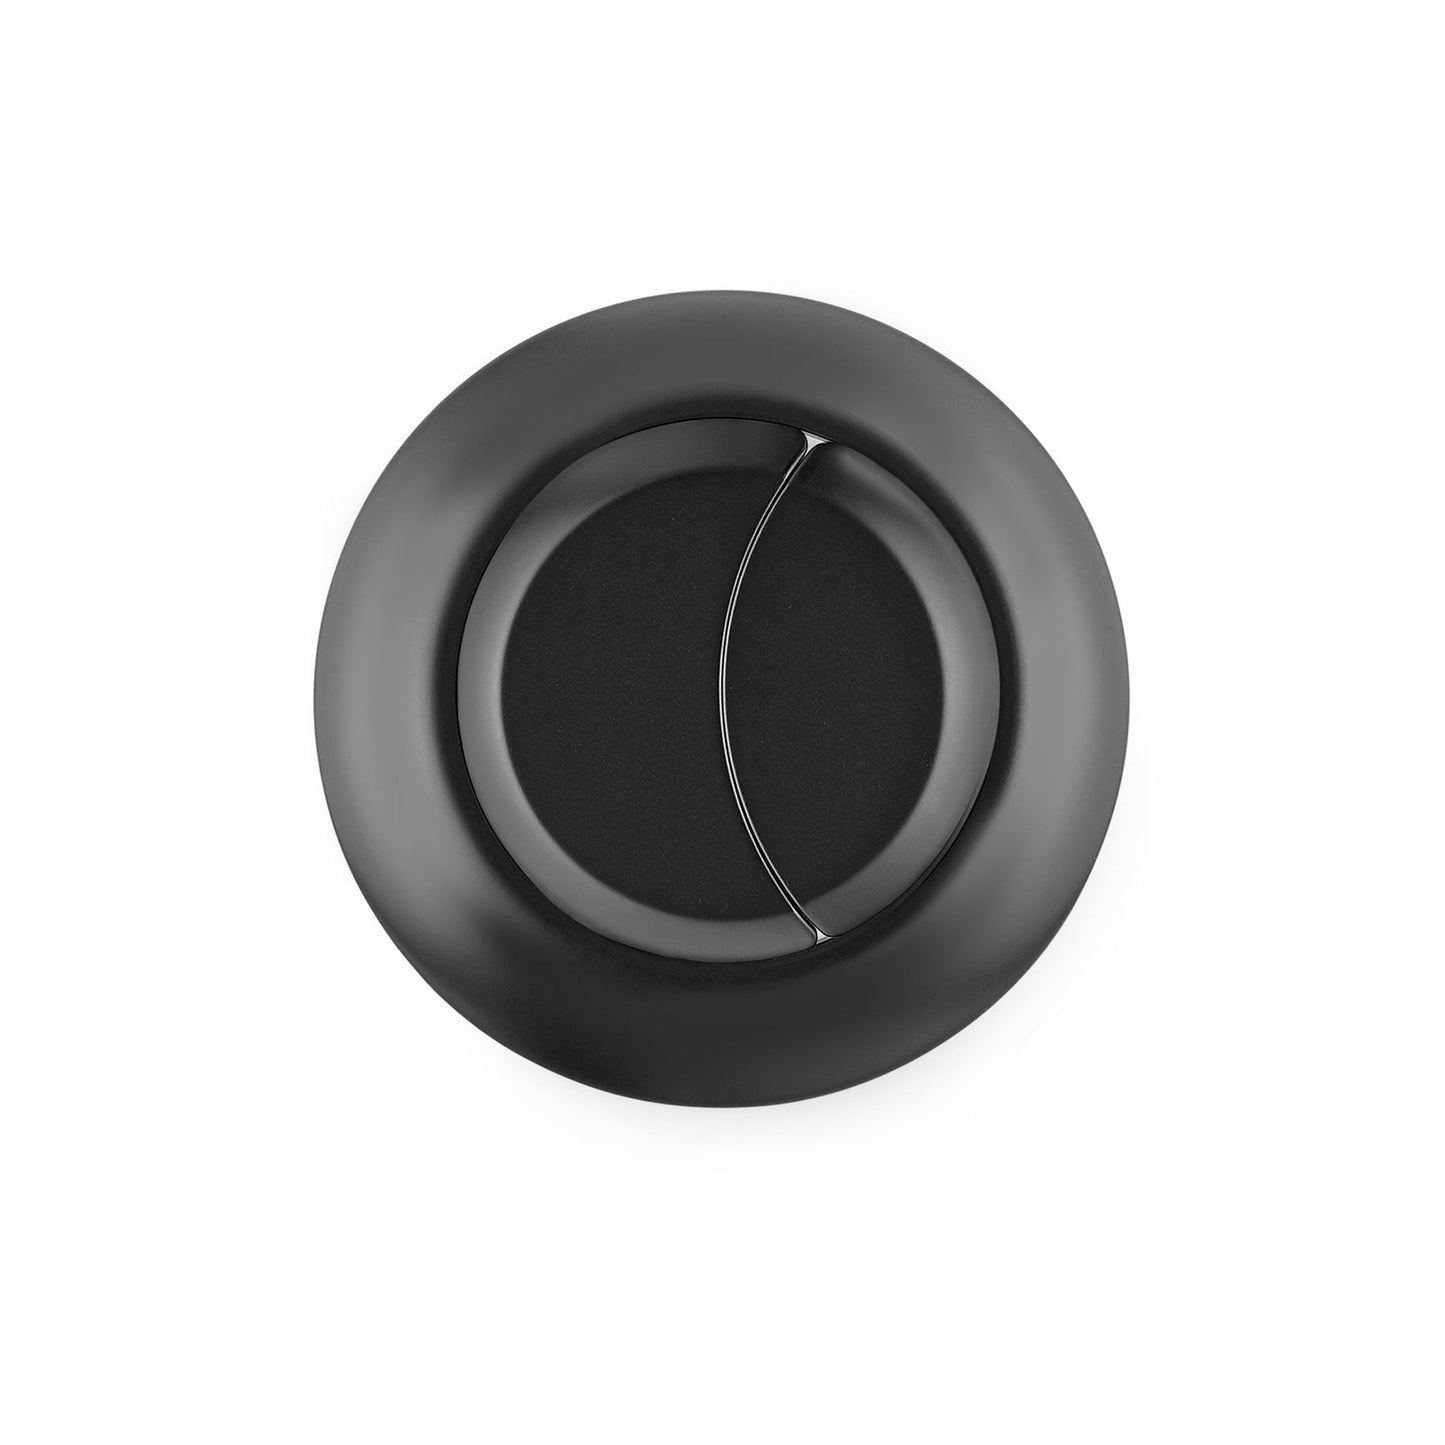 Swiss Madison Round Black Toilet Push Buttons With QQ Feet For SM-1T256, SM-1T205